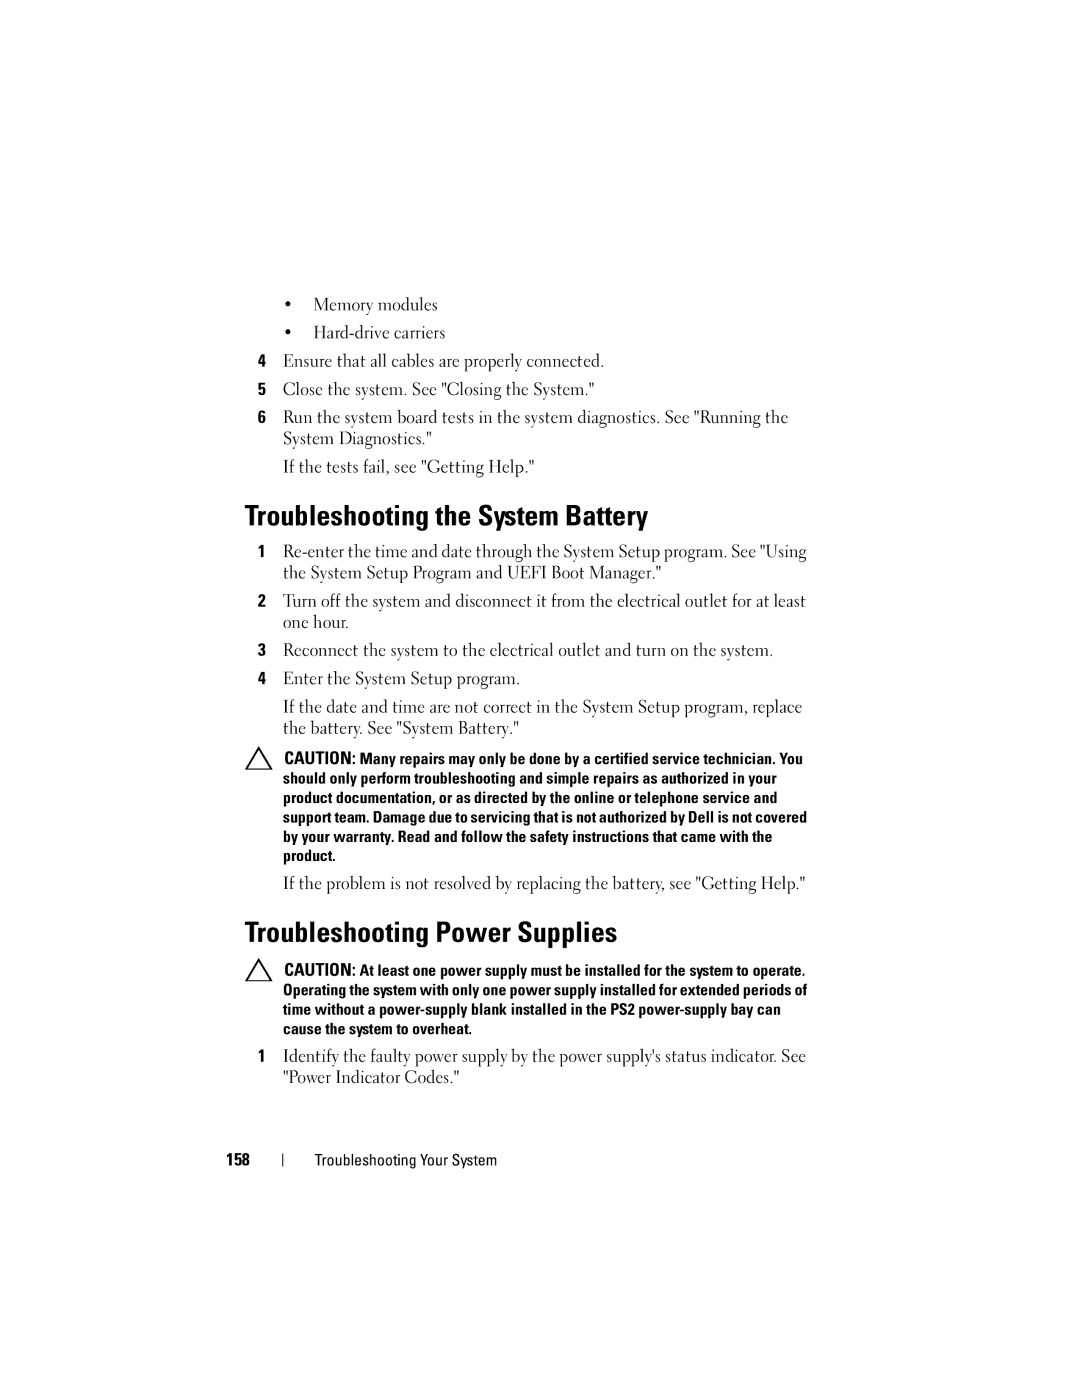 Dell R710 owner manual Troubleshooting the System Battery, Troubleshooting Power Supplies 